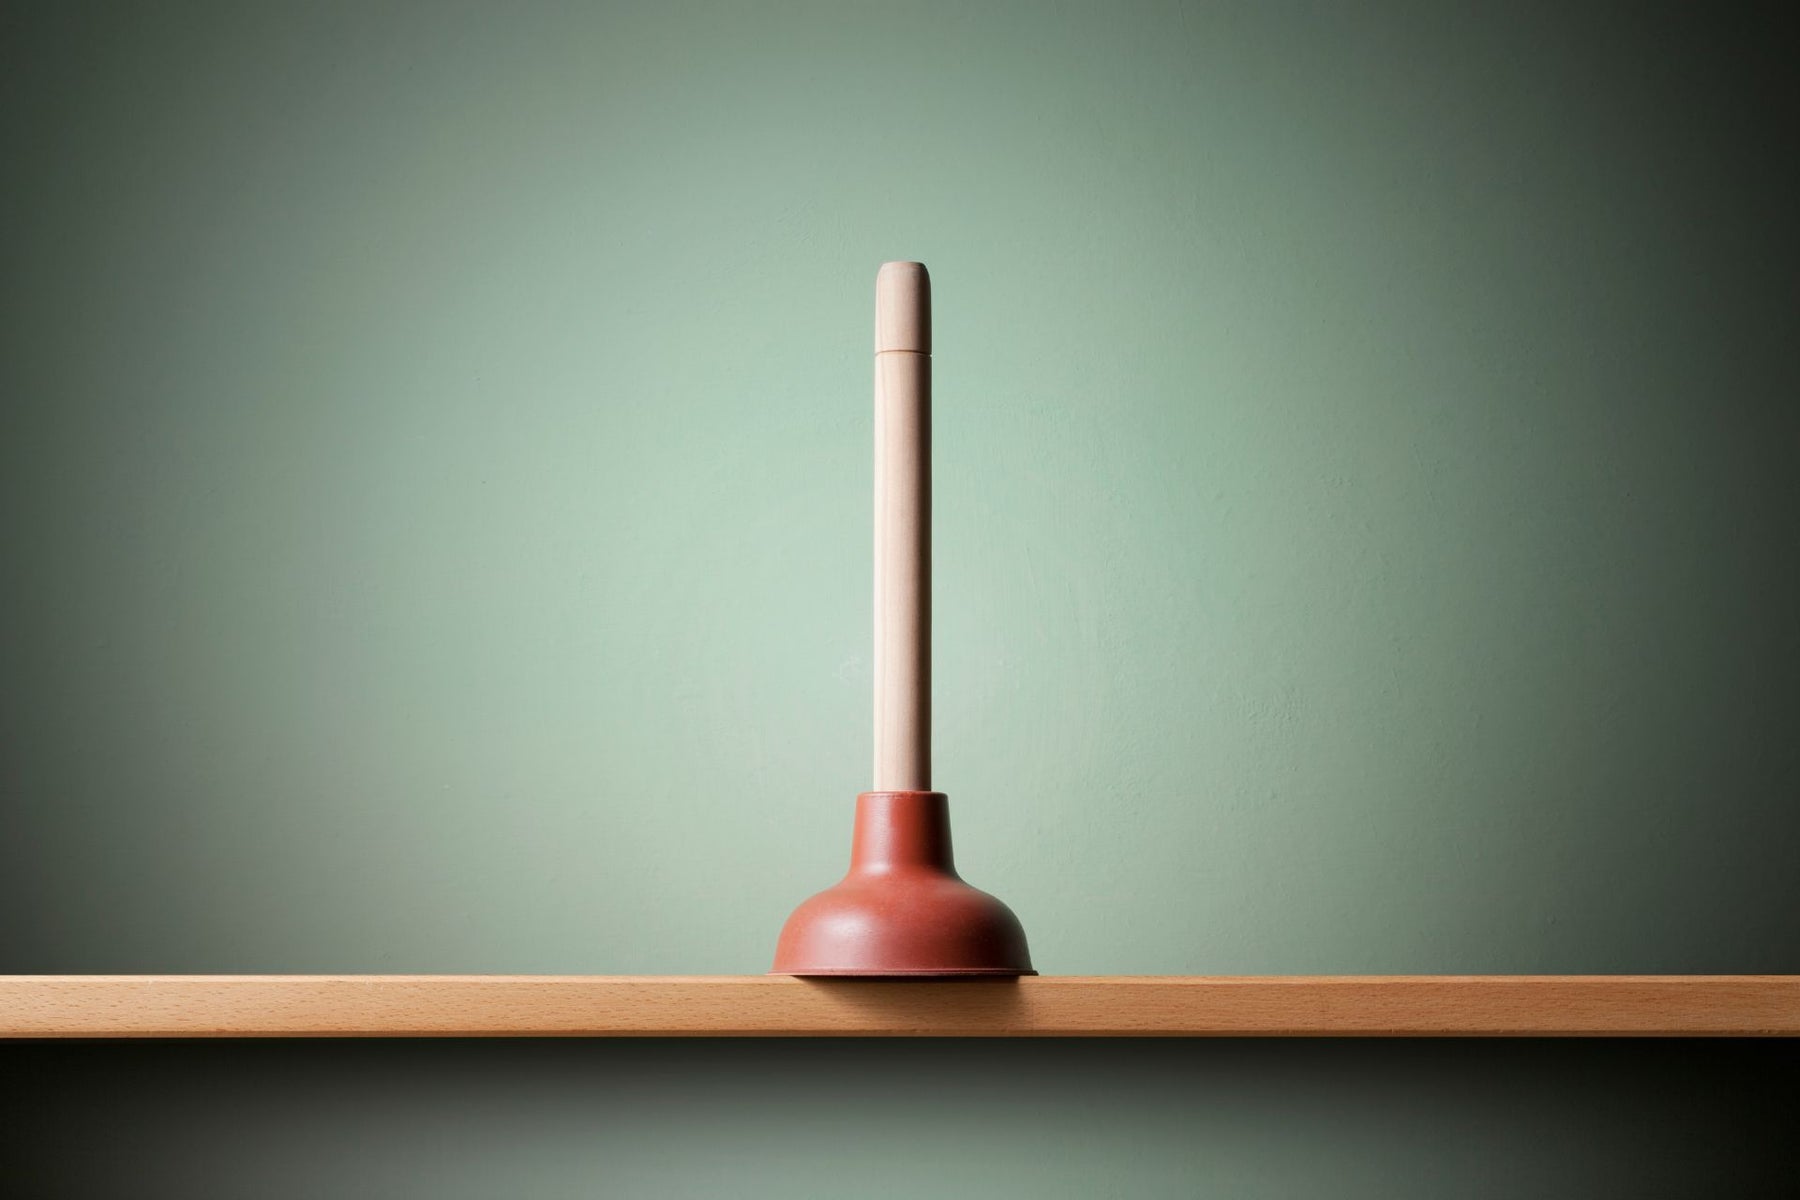 A standard plunger on top of a wooden plank